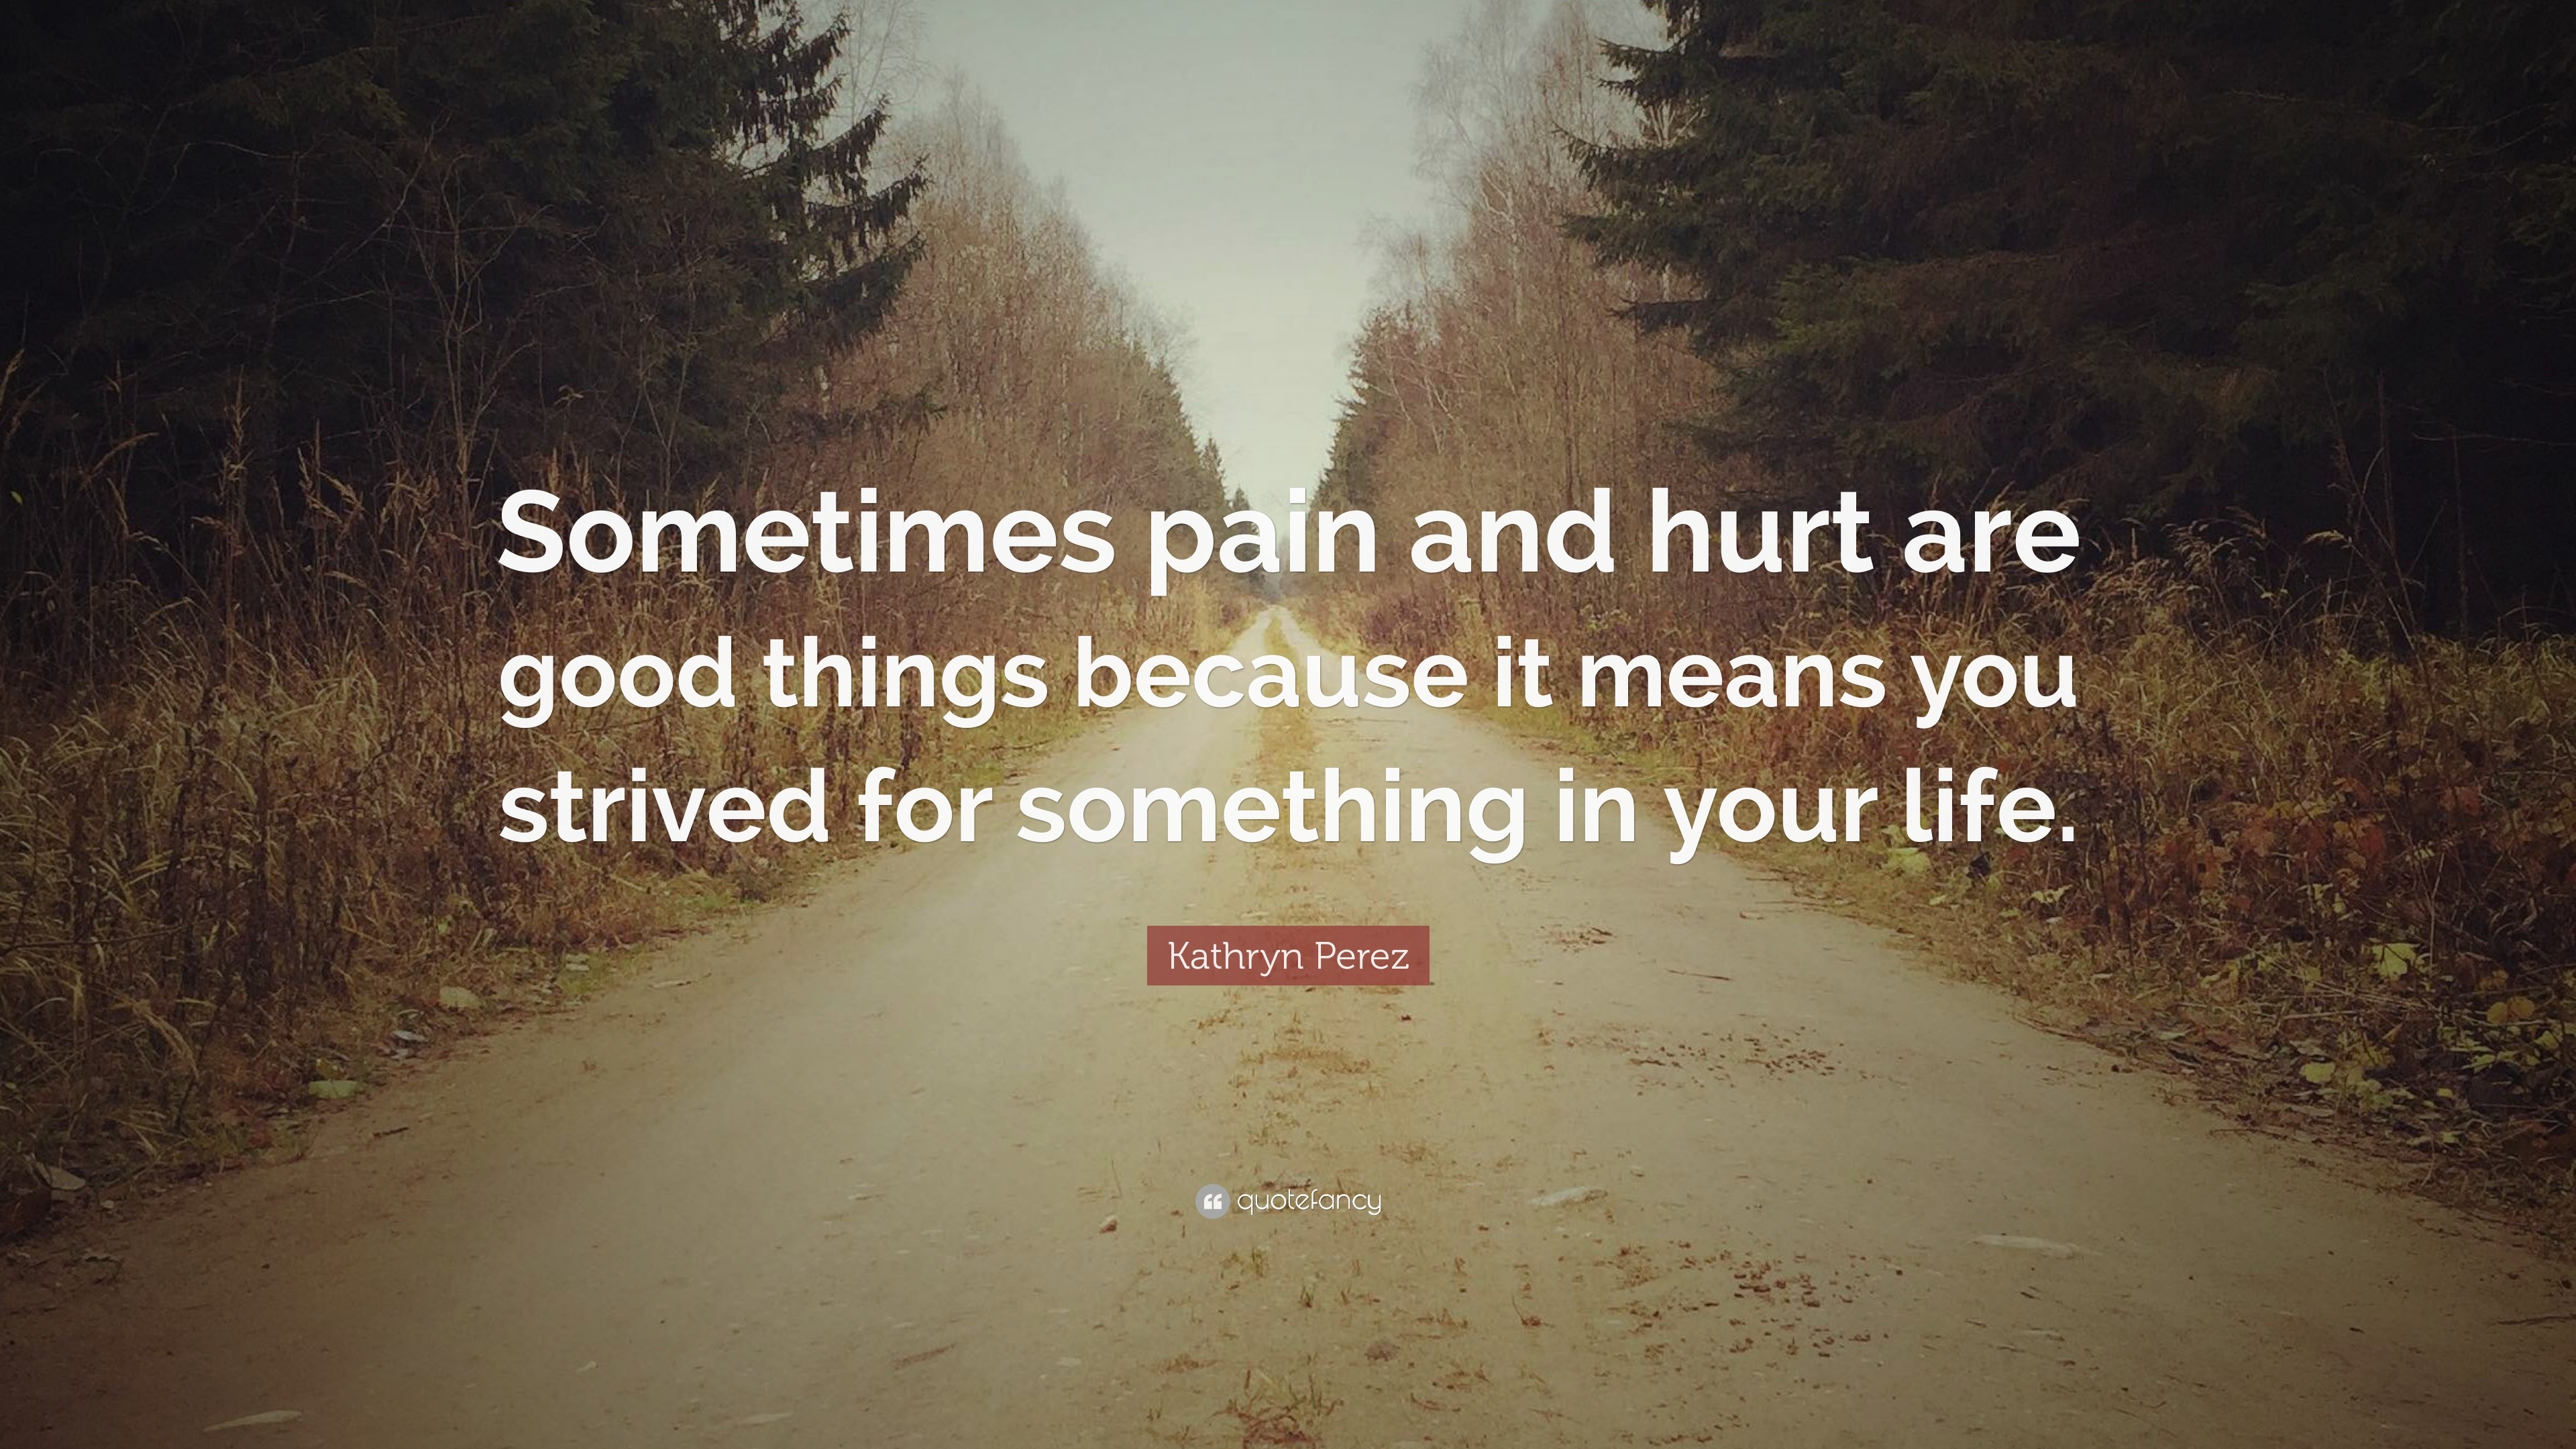 Kathryn Perez Quote: “Sometimes pain and hurt are good things because ...